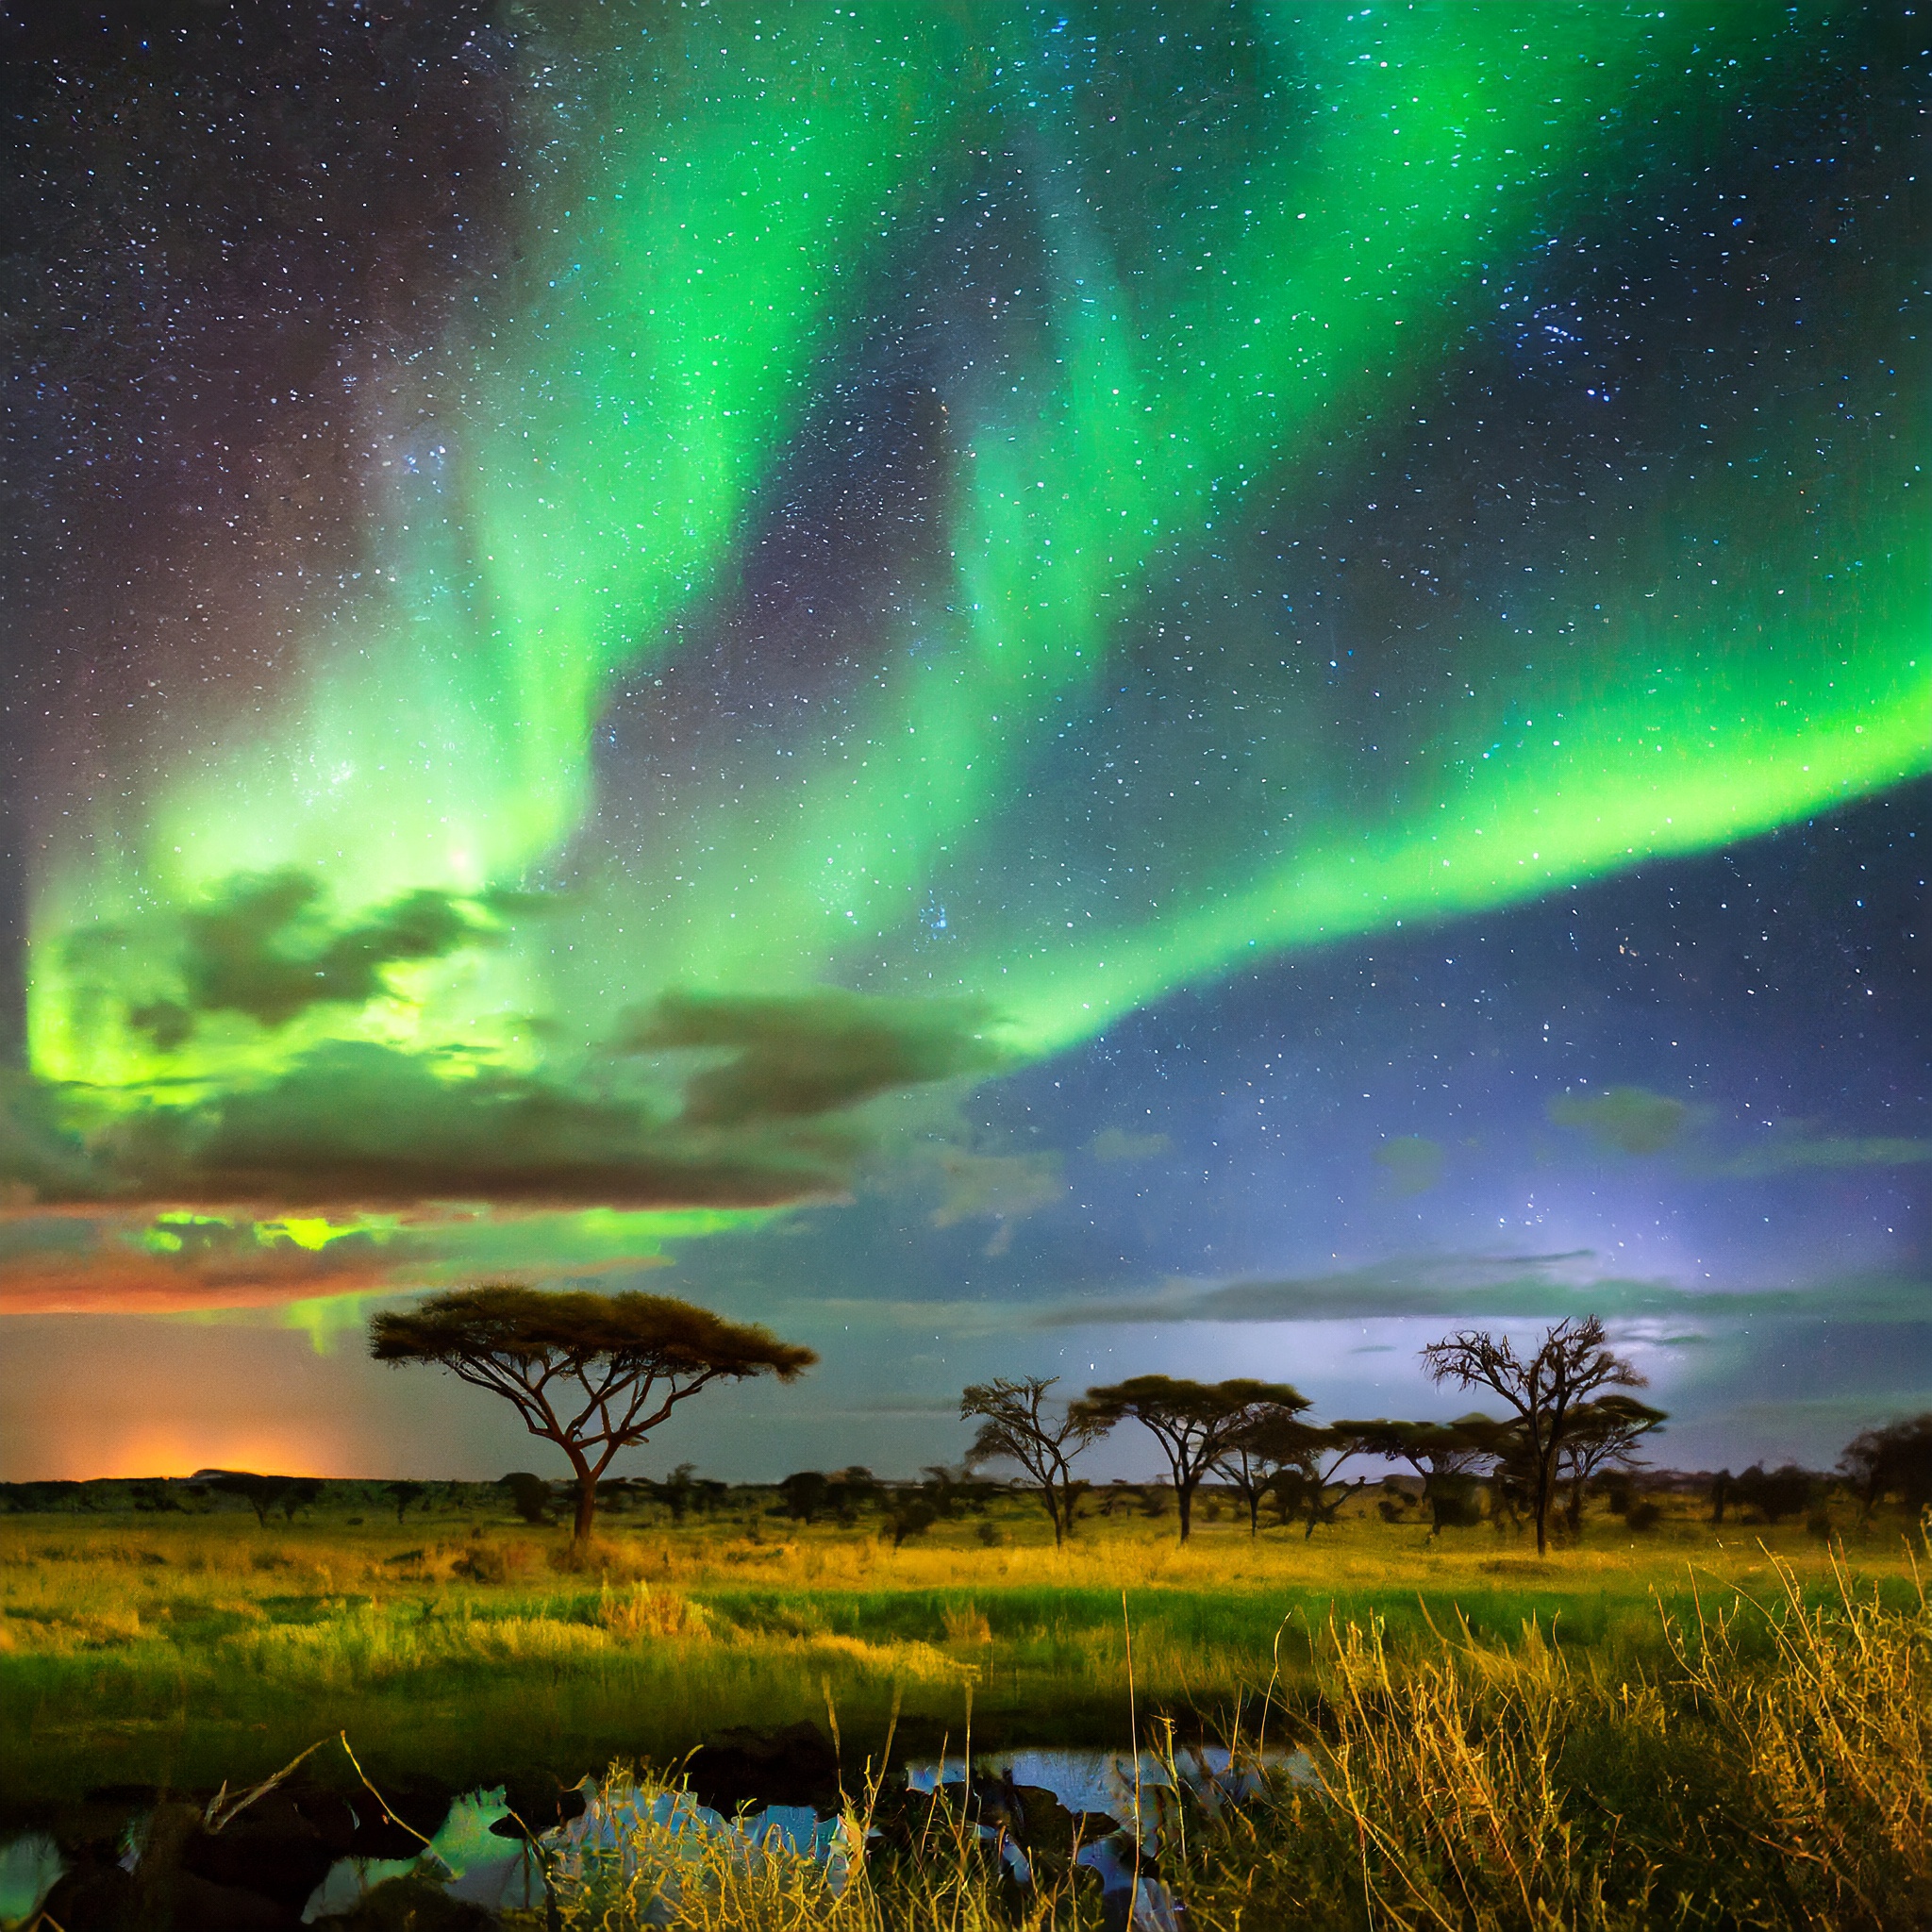 Spectacular auroras lit up the sky nearly every night during Laschamps Excursion